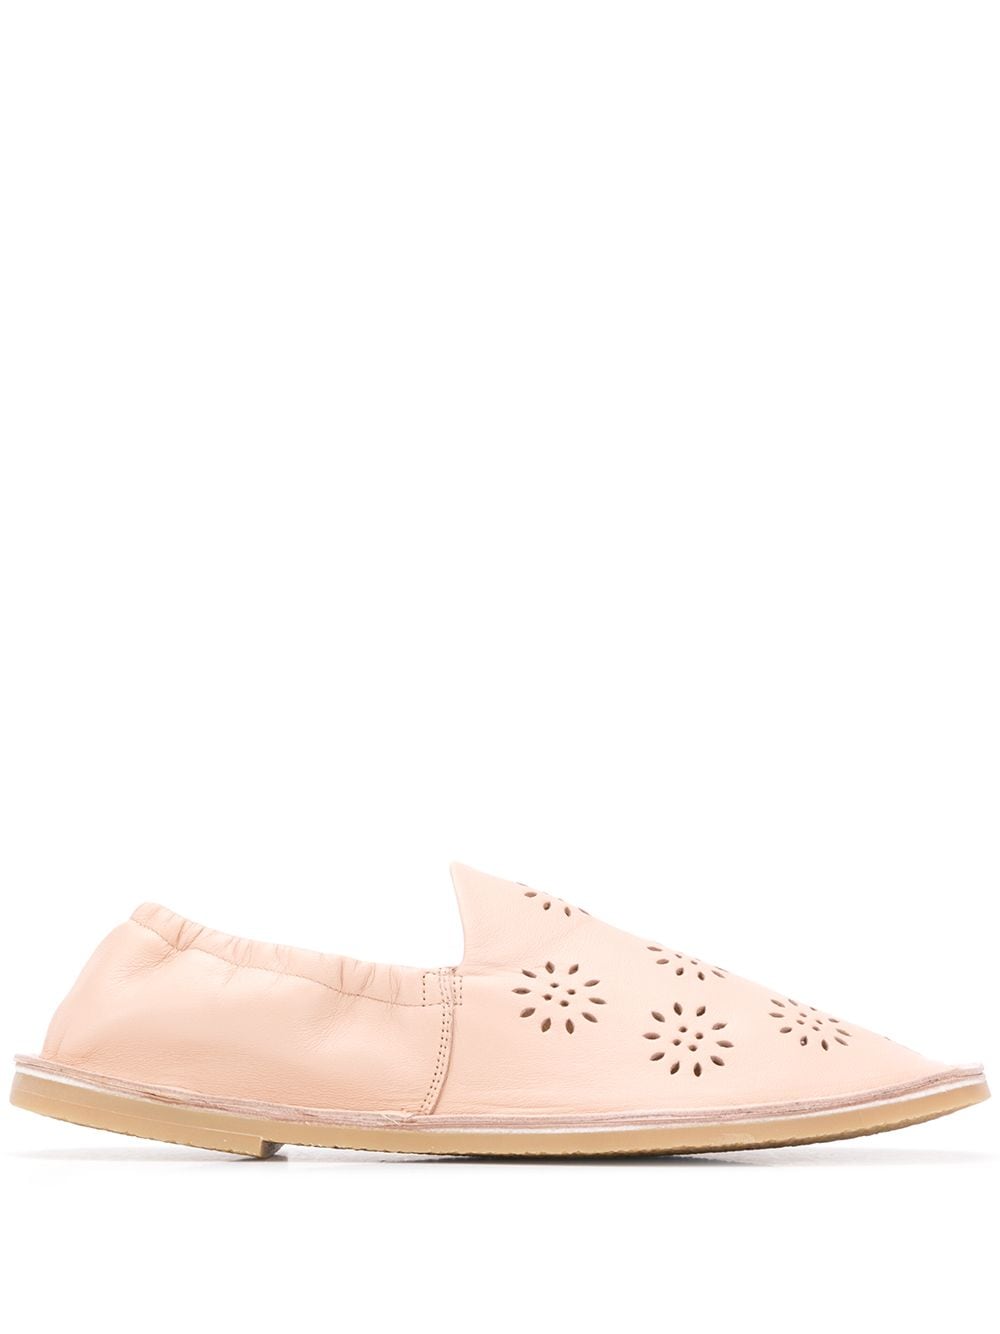 Acne Studios Perforated Loafers In Pink